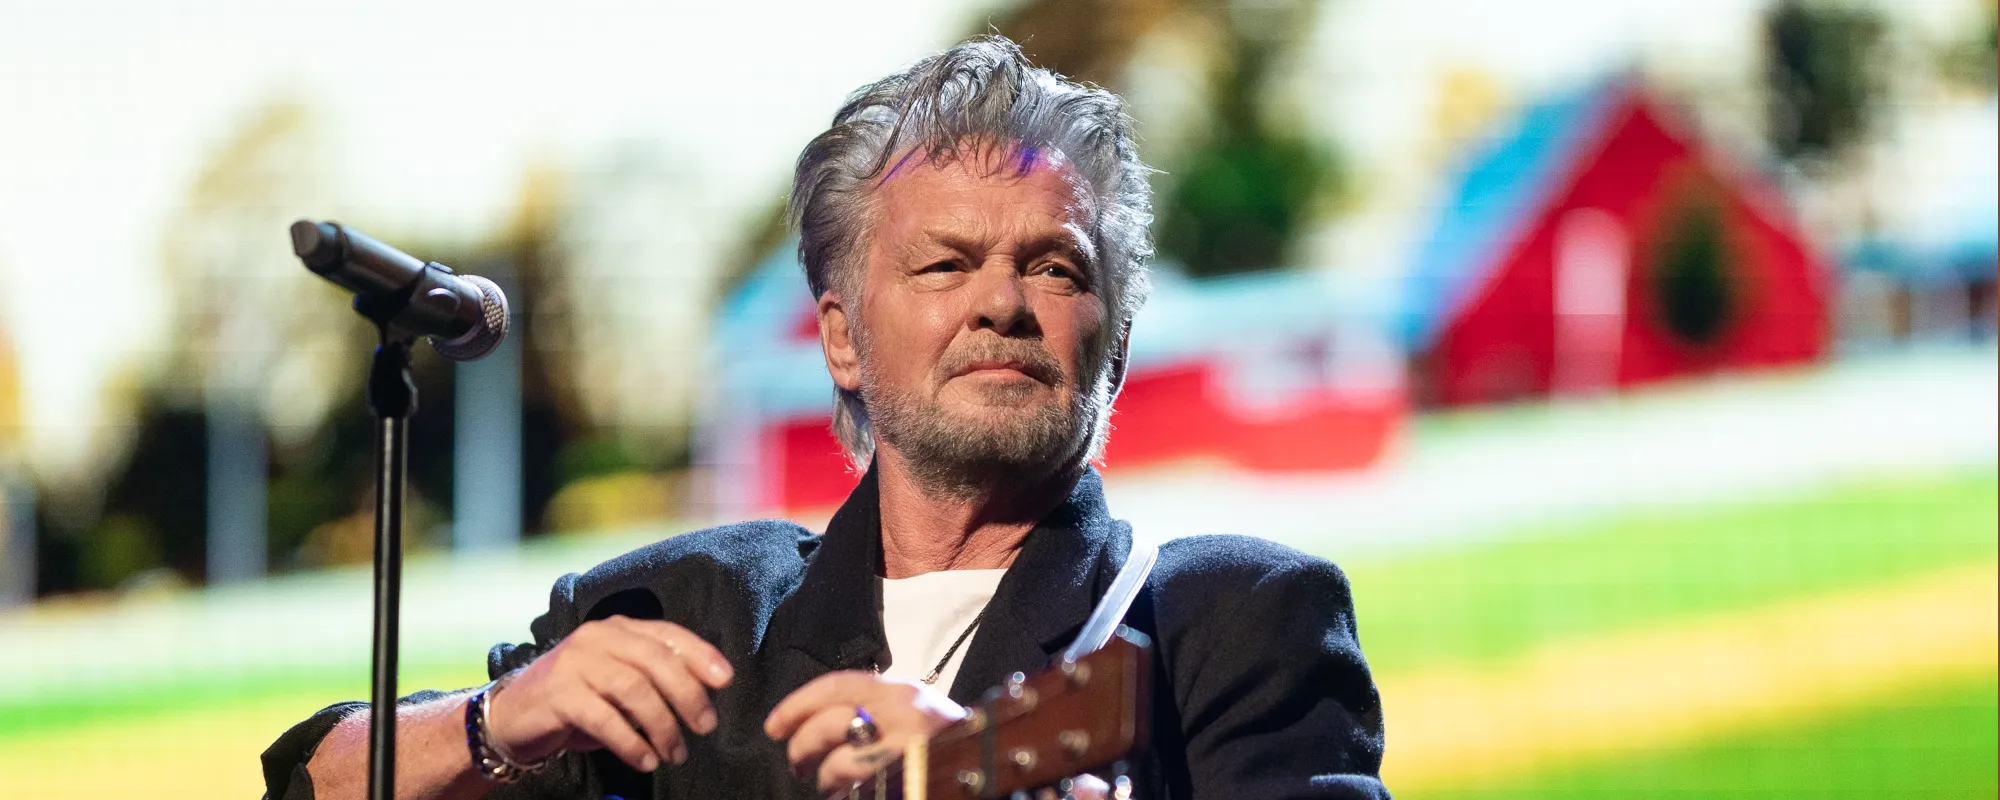 The Nostalgia Behind the Meaning of “Cherry Bomb” by John Mellencamp